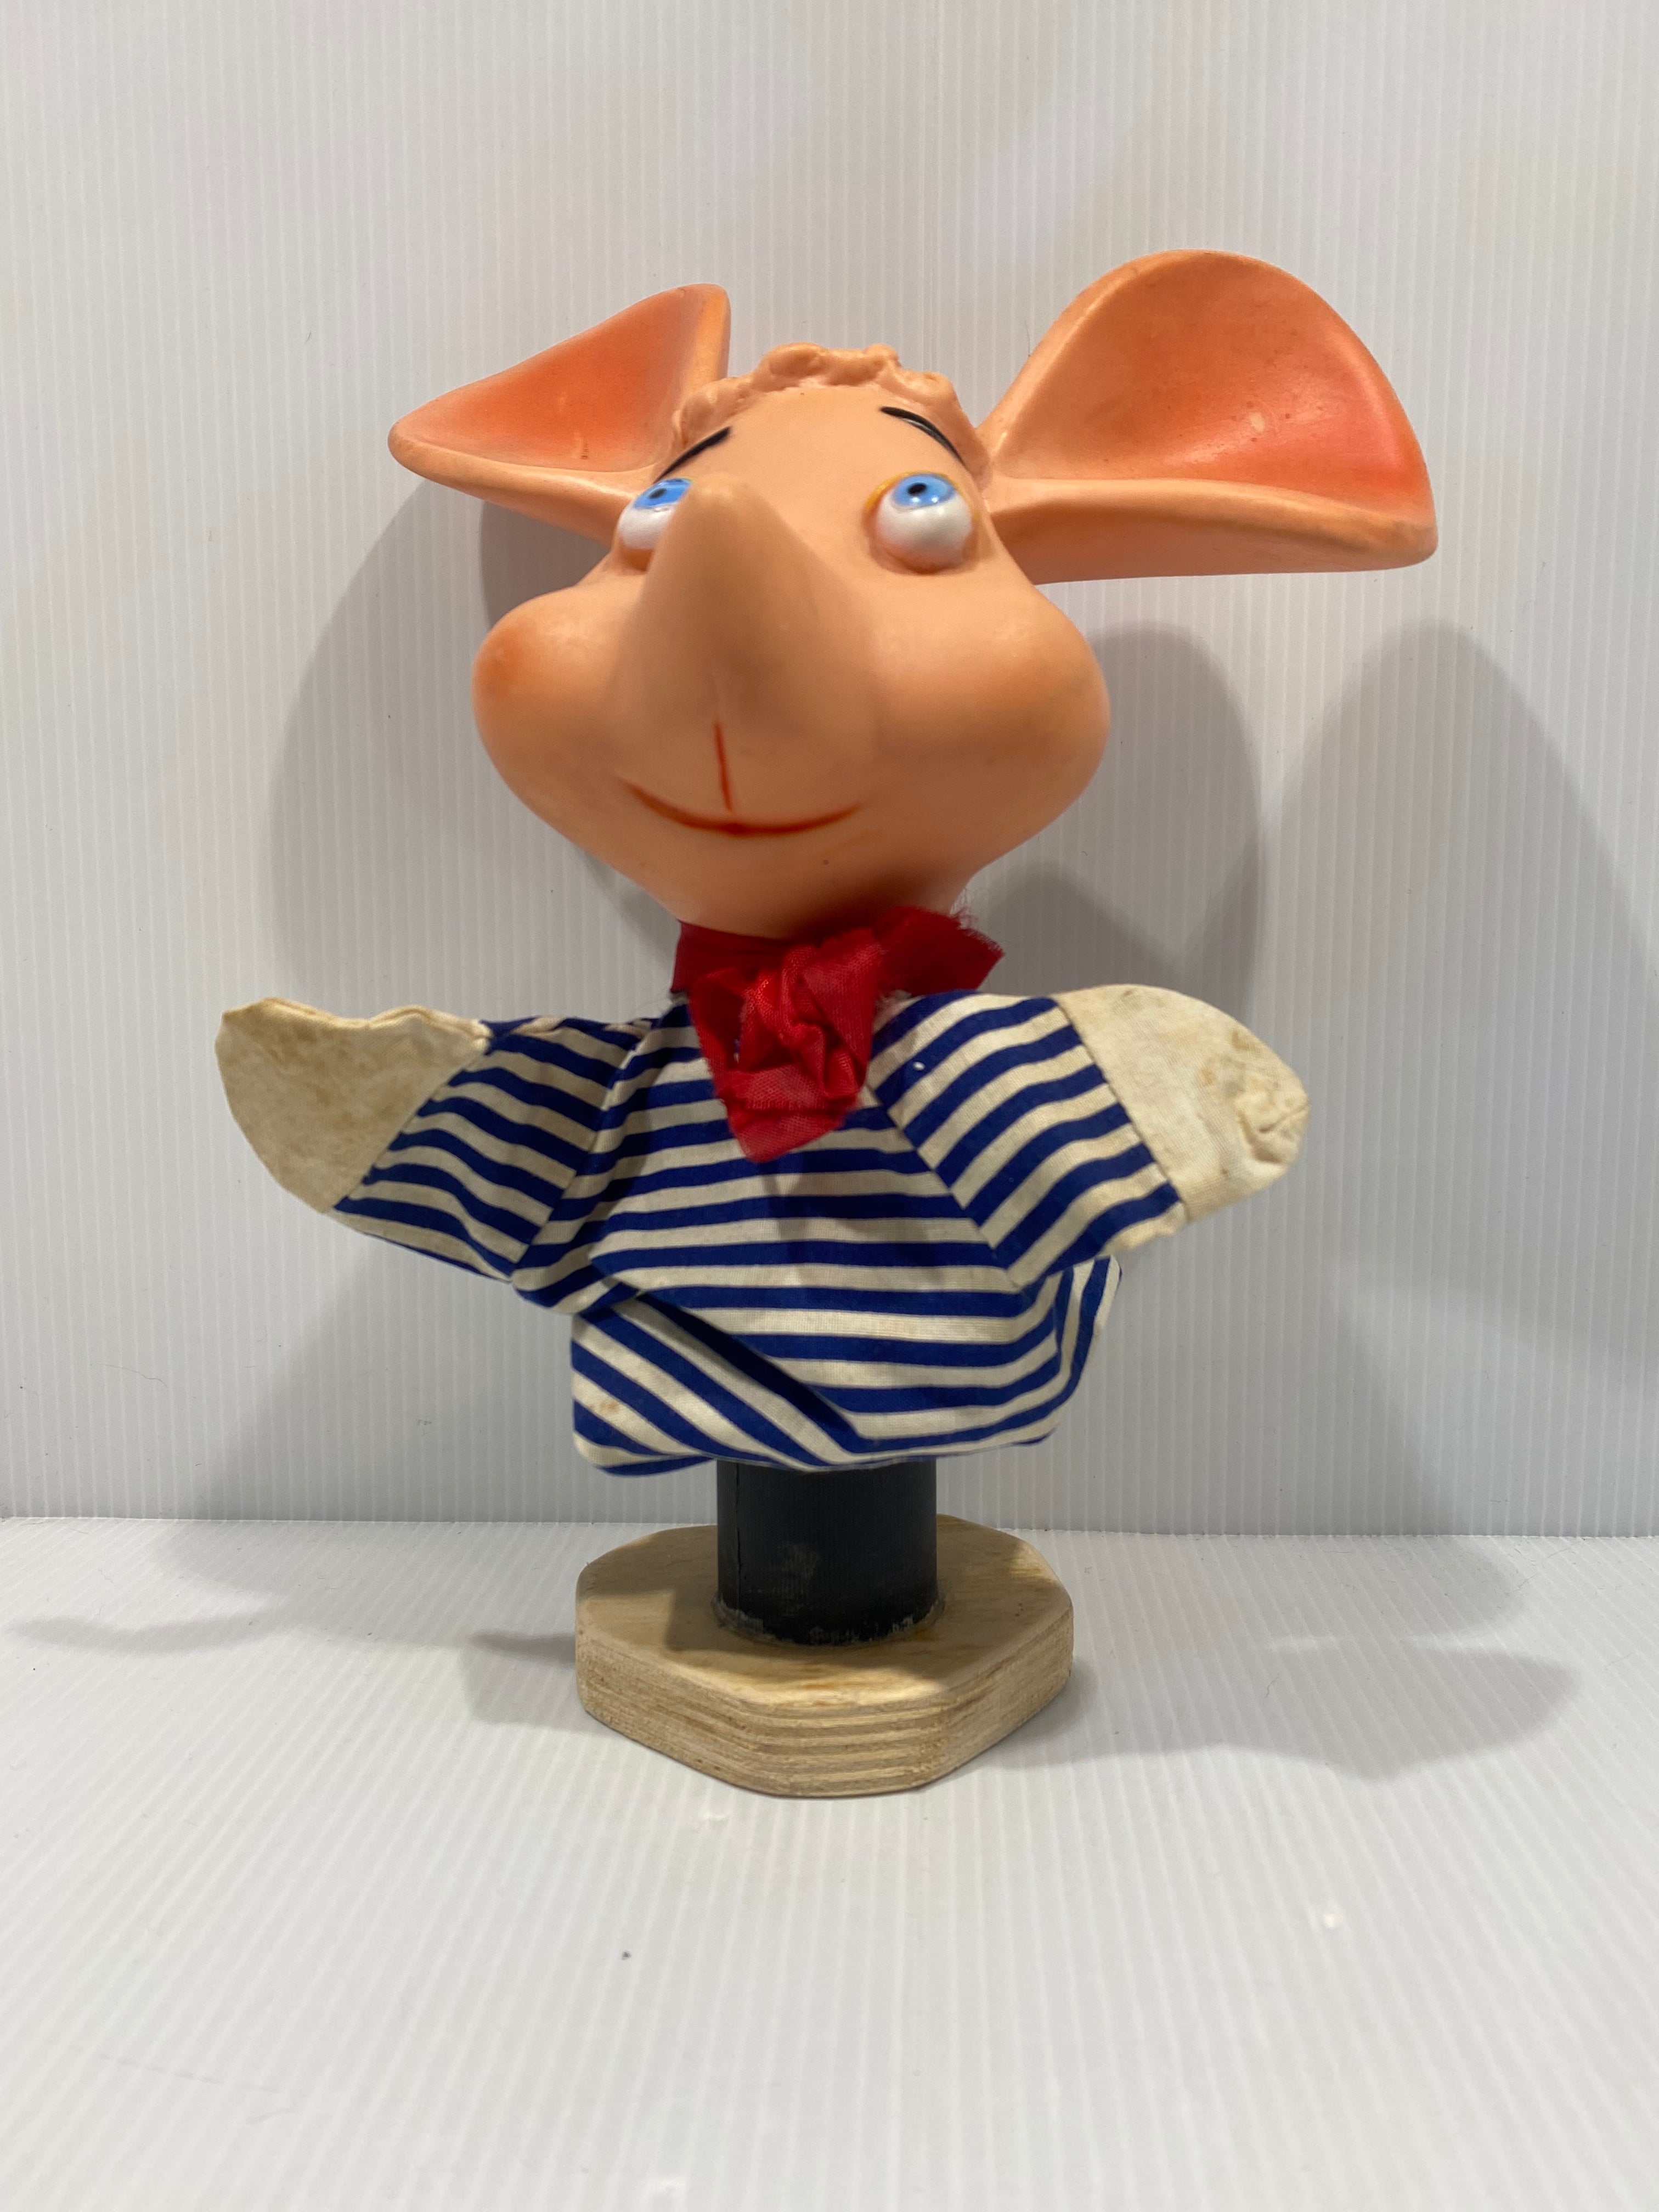 Vintage Chad Valley Topo Gigio hand puppet 1960s, Made in England